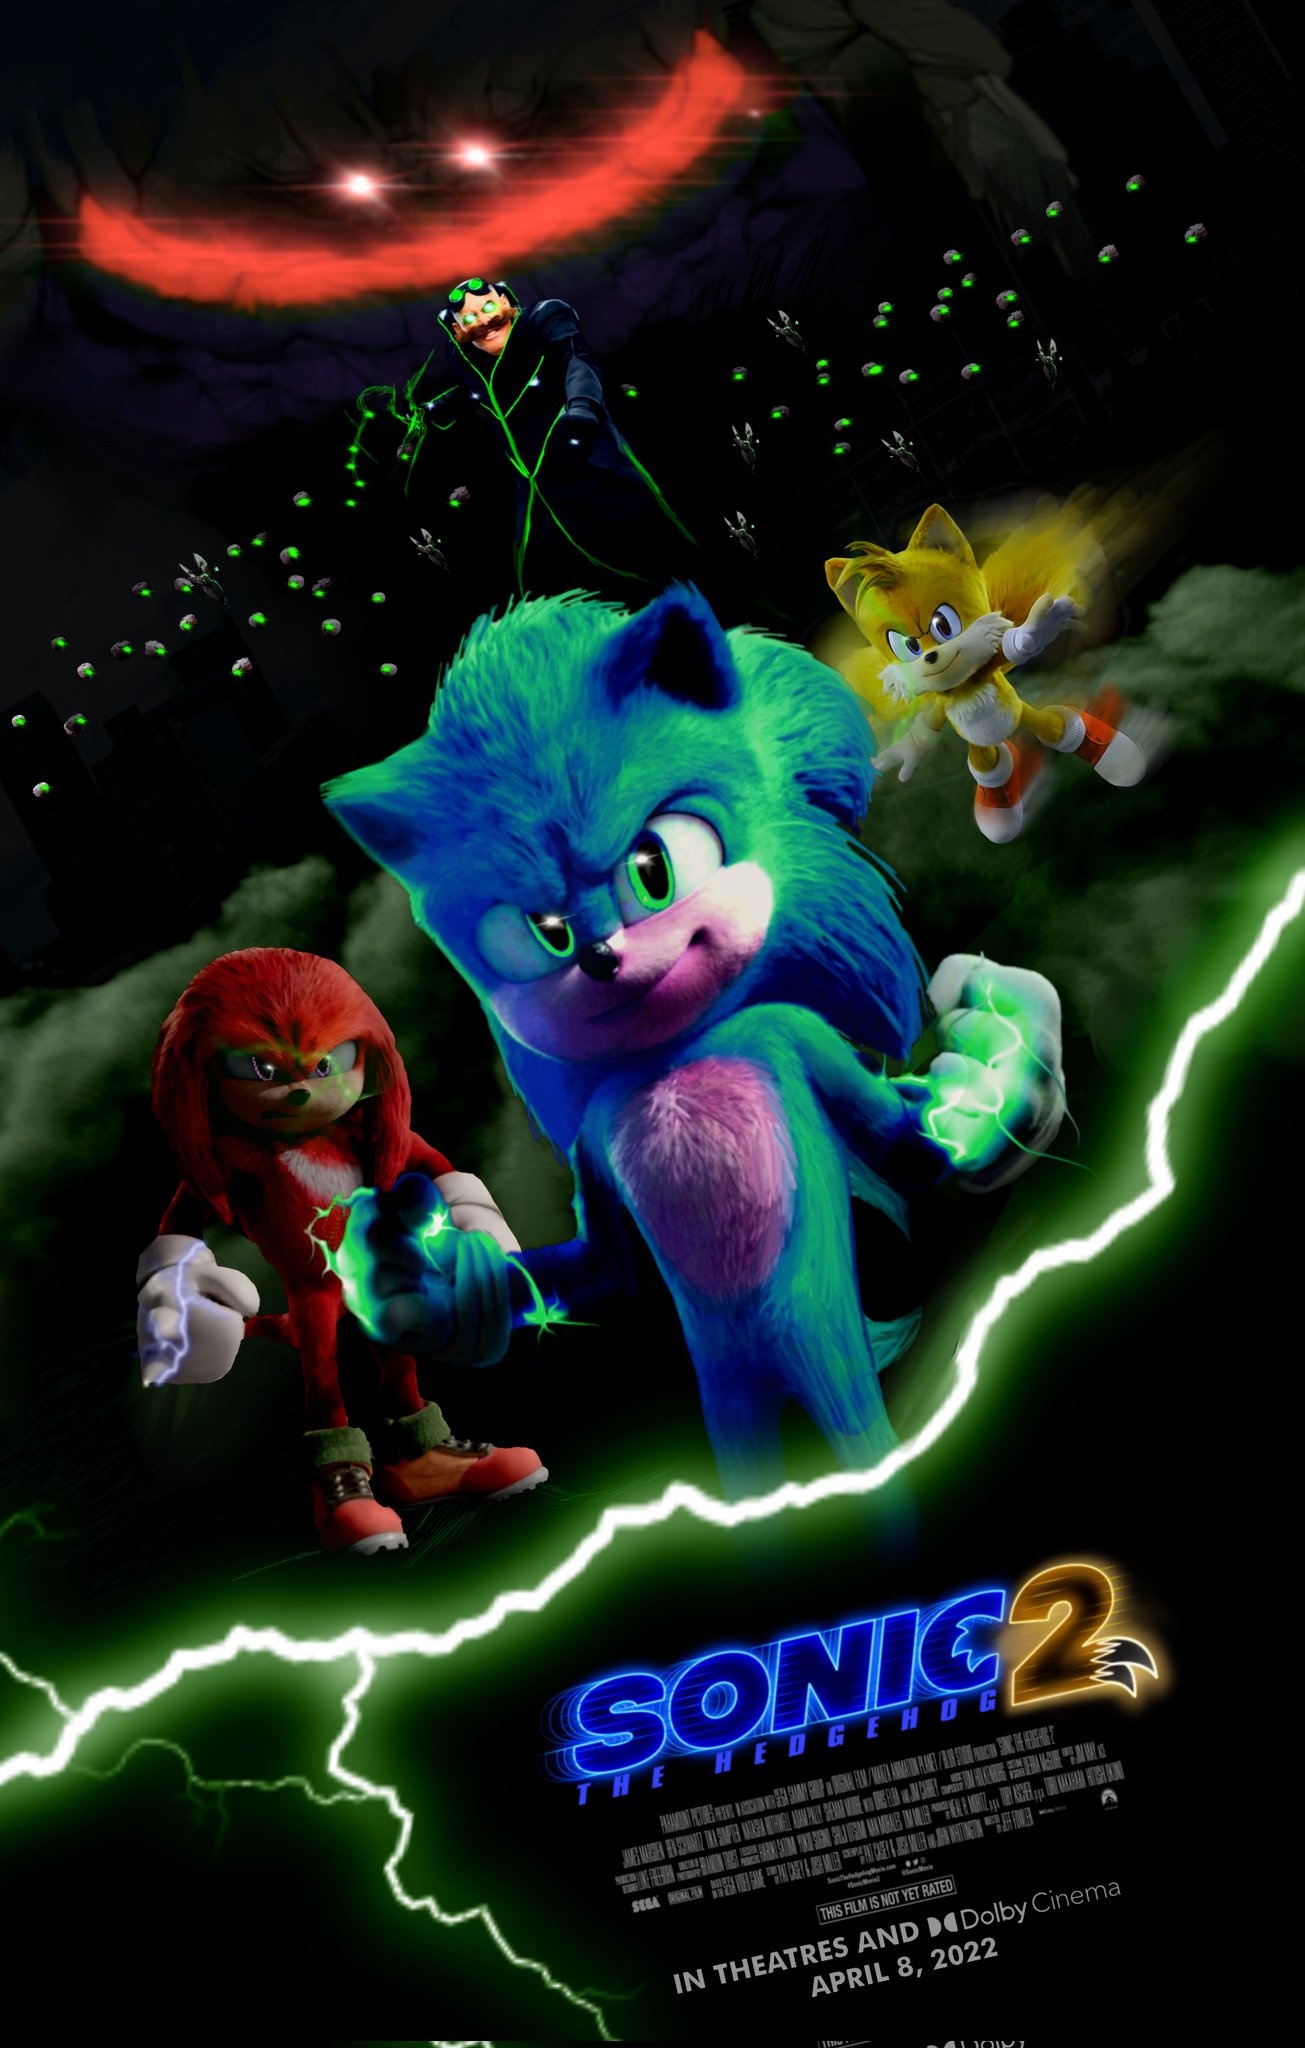 Twitter hashflags, AR filter and new poster sighted for Sonic the Hedgehog 2  - Tails' Channel